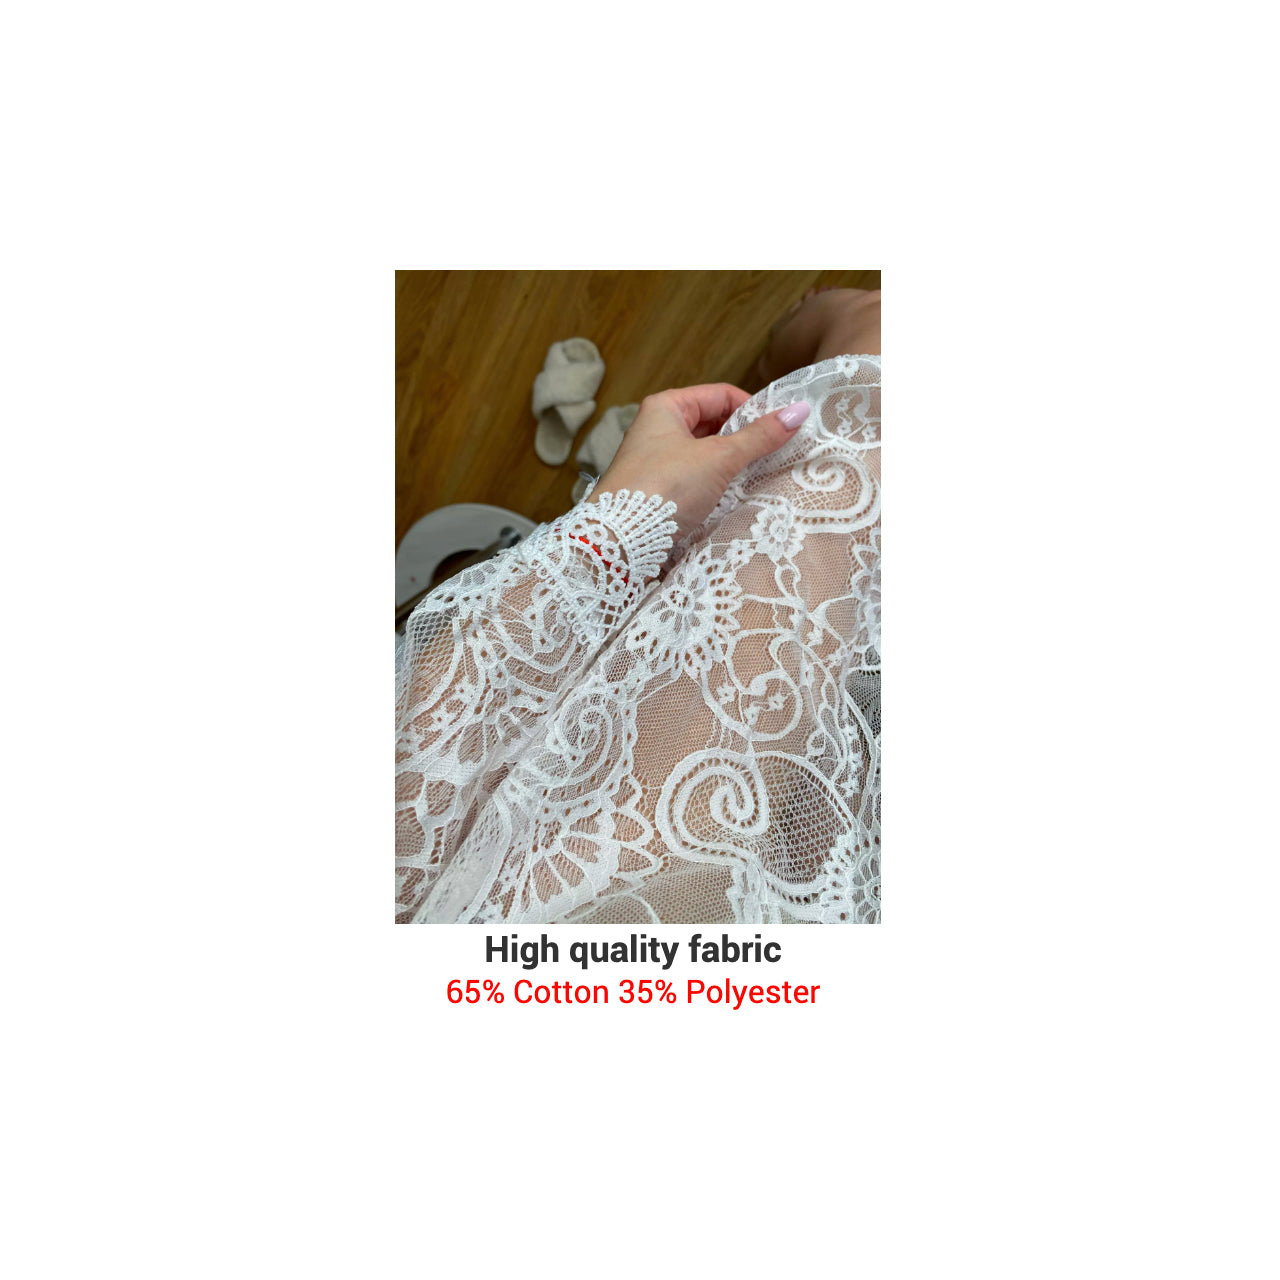 White Floral Lace Tunic / Dress / Beach Cover Up in Size S, M, L, or XL